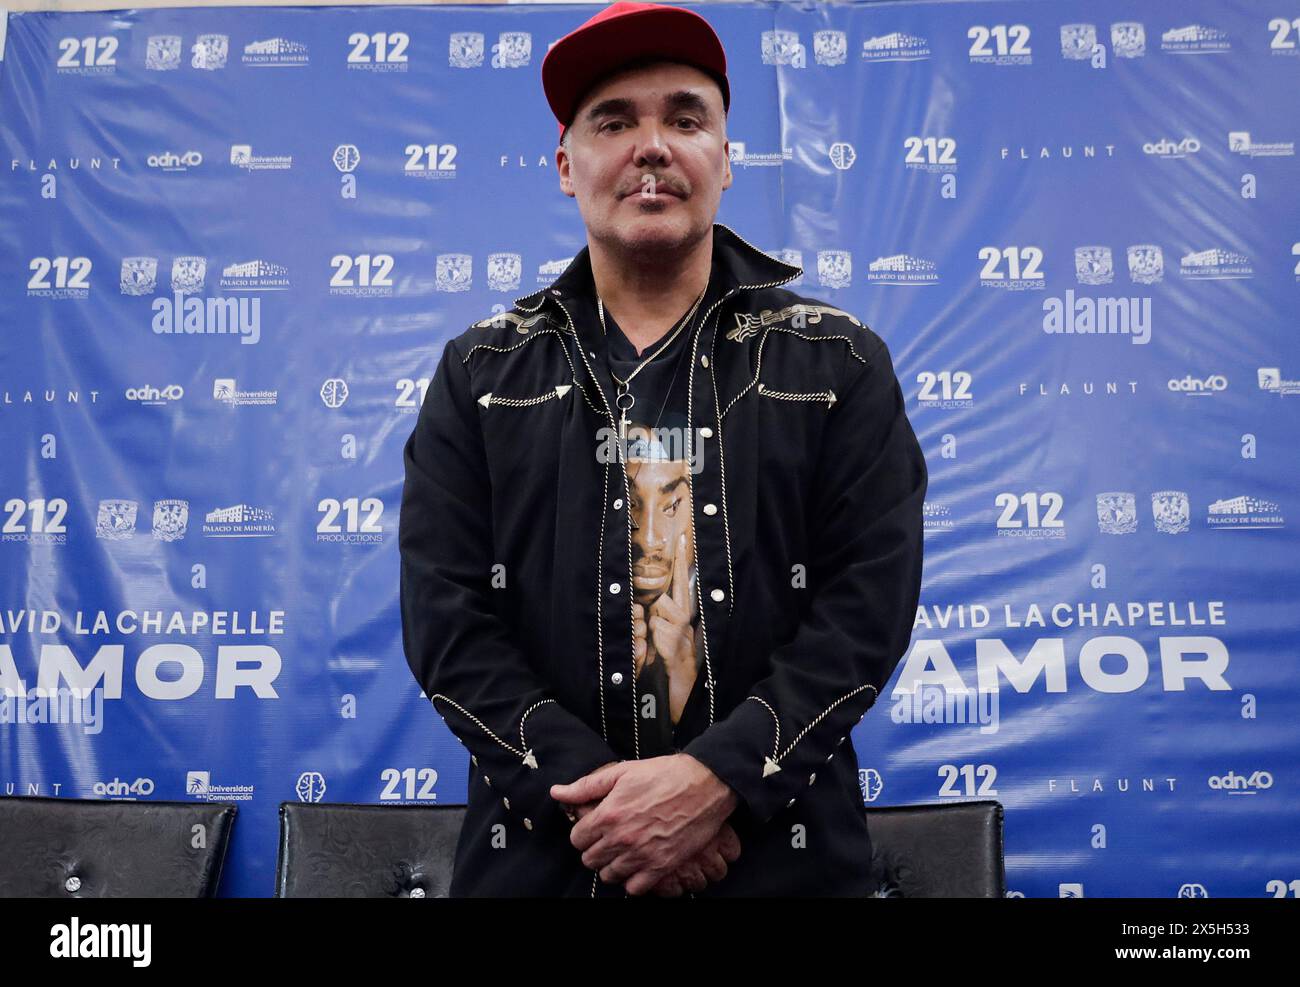 Mexico City, Mexico. 09th May, 2024. David LaChapelle, a New York photographer, is posing during a press conference at the Palacio de Mineria in Mexico City, where he is giving details of his new exhibition ''Love, '' which will be open for visits from May 11 to July 13 of this year. The exhibition includes more than 100 works created from 1985 to the present, featuring his new series 'Viacrucis'. (Photo by Gerardo Vieyra/NurPhoto) Credit: NurPhoto SRL/Alamy Live News Stock Photo